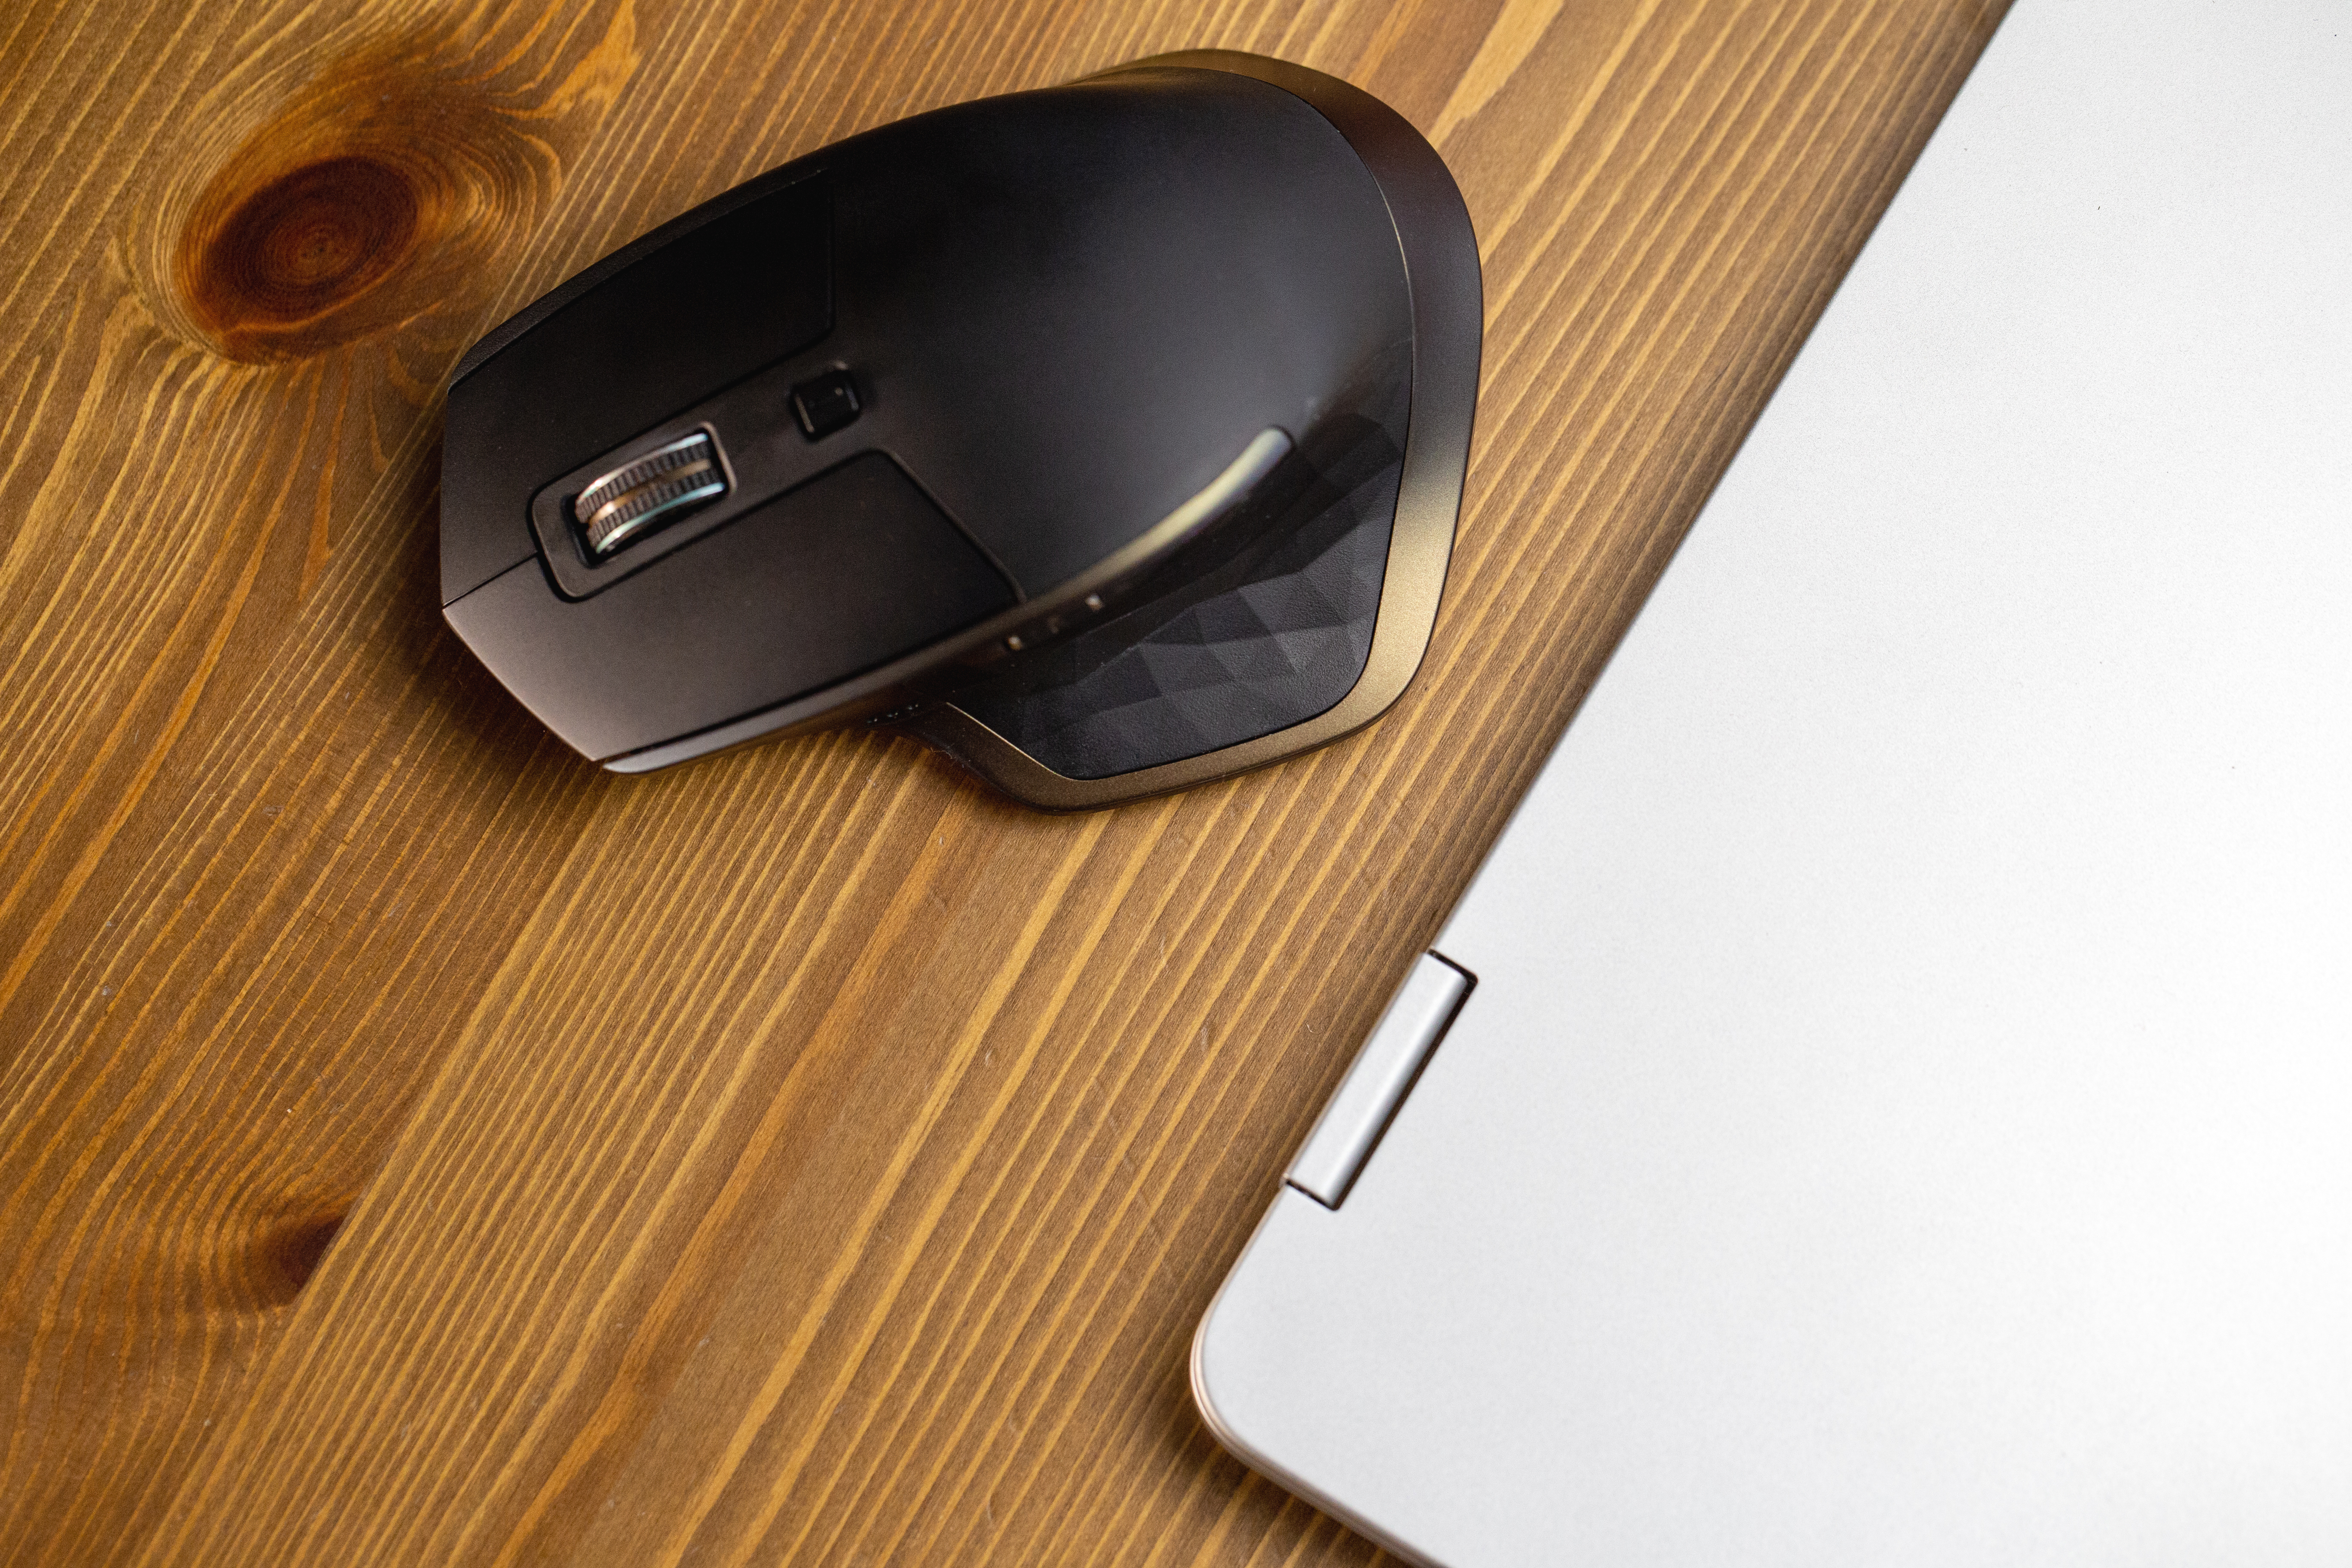 Mouse And Laptop On Desk Free Stock Photo Negativespace